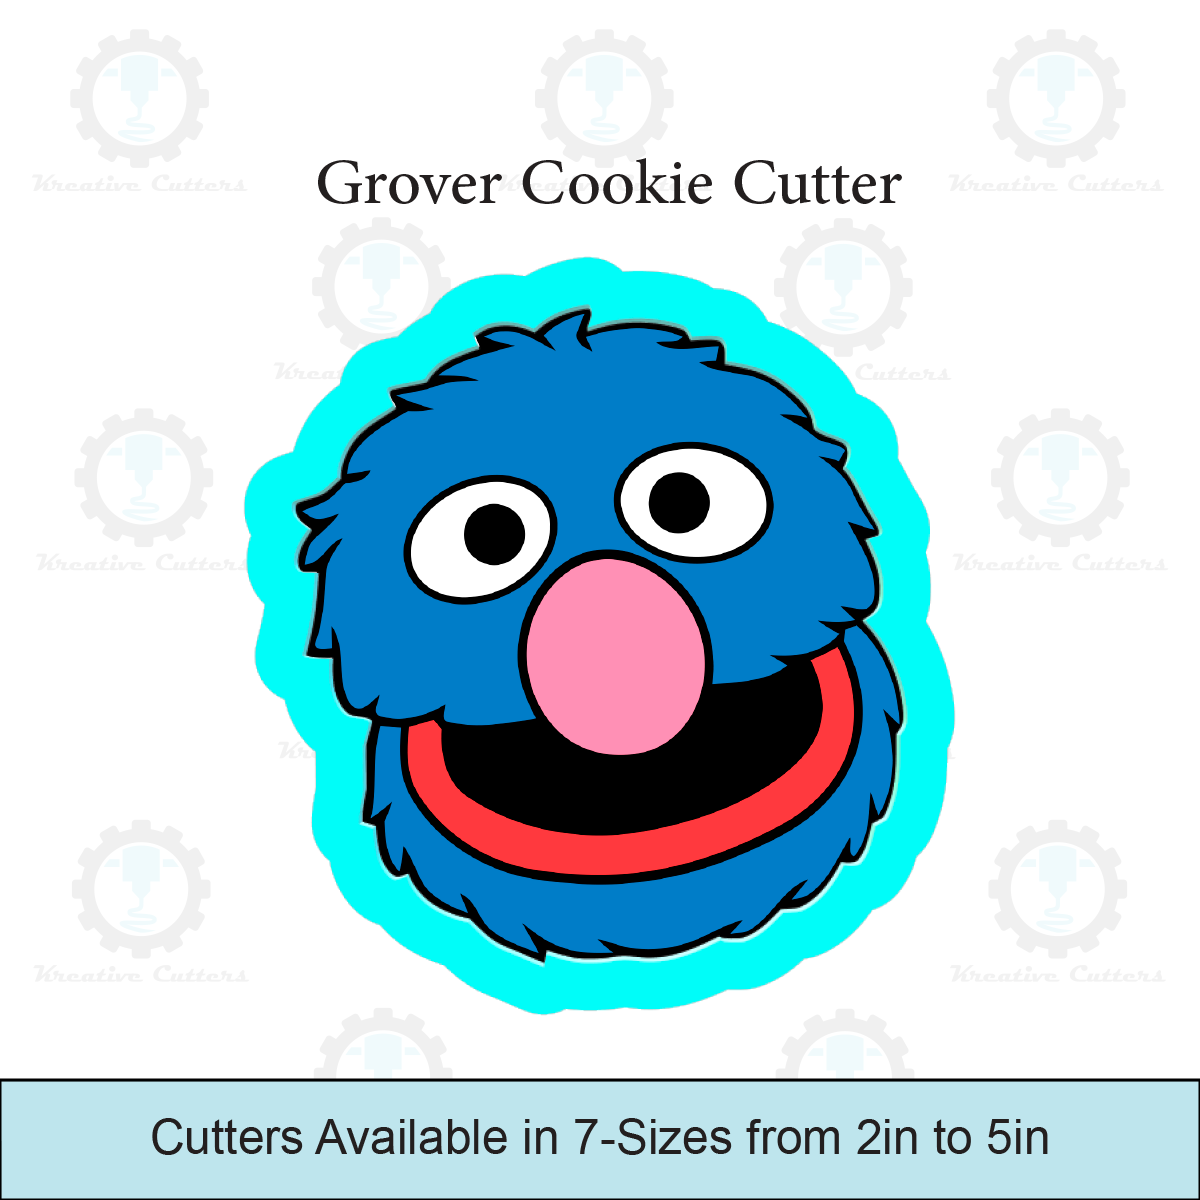 Grover Cookie Cutter